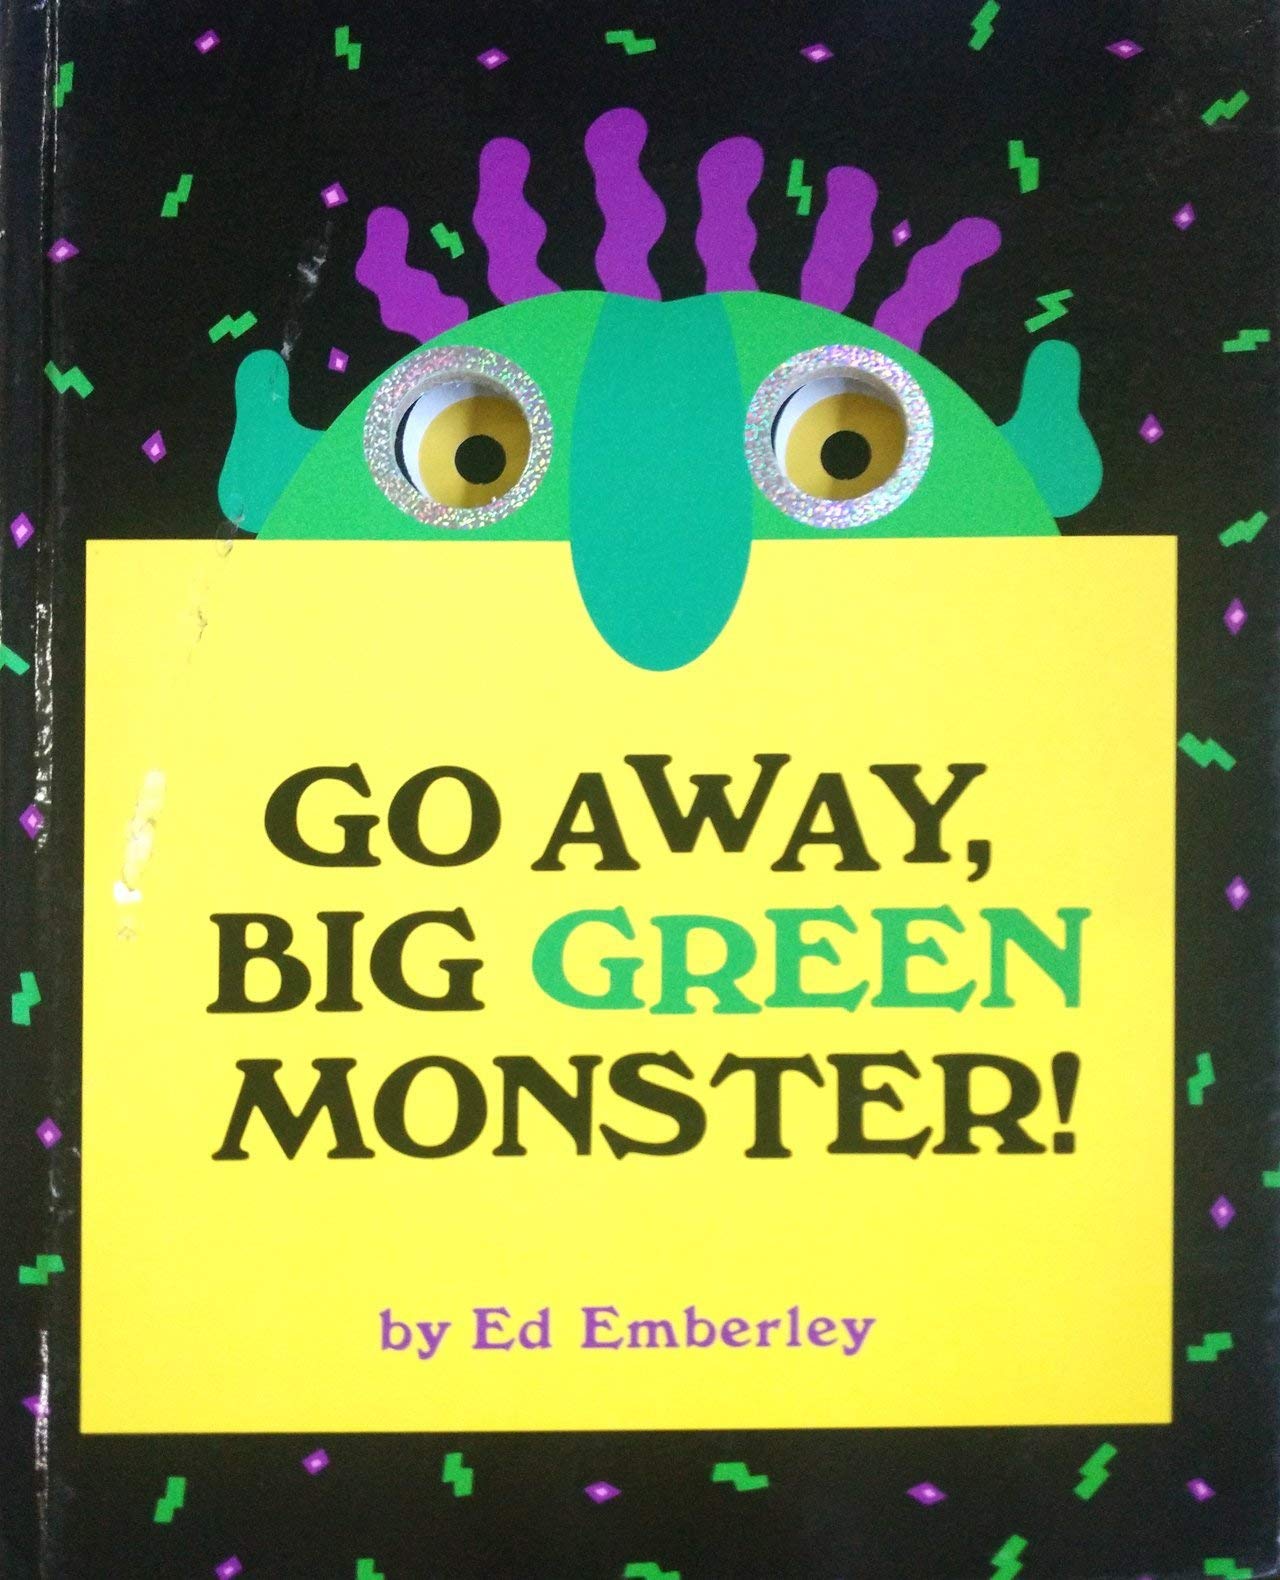 speech and language teaching concepts for Go Away Big Green Monster in speech therapy